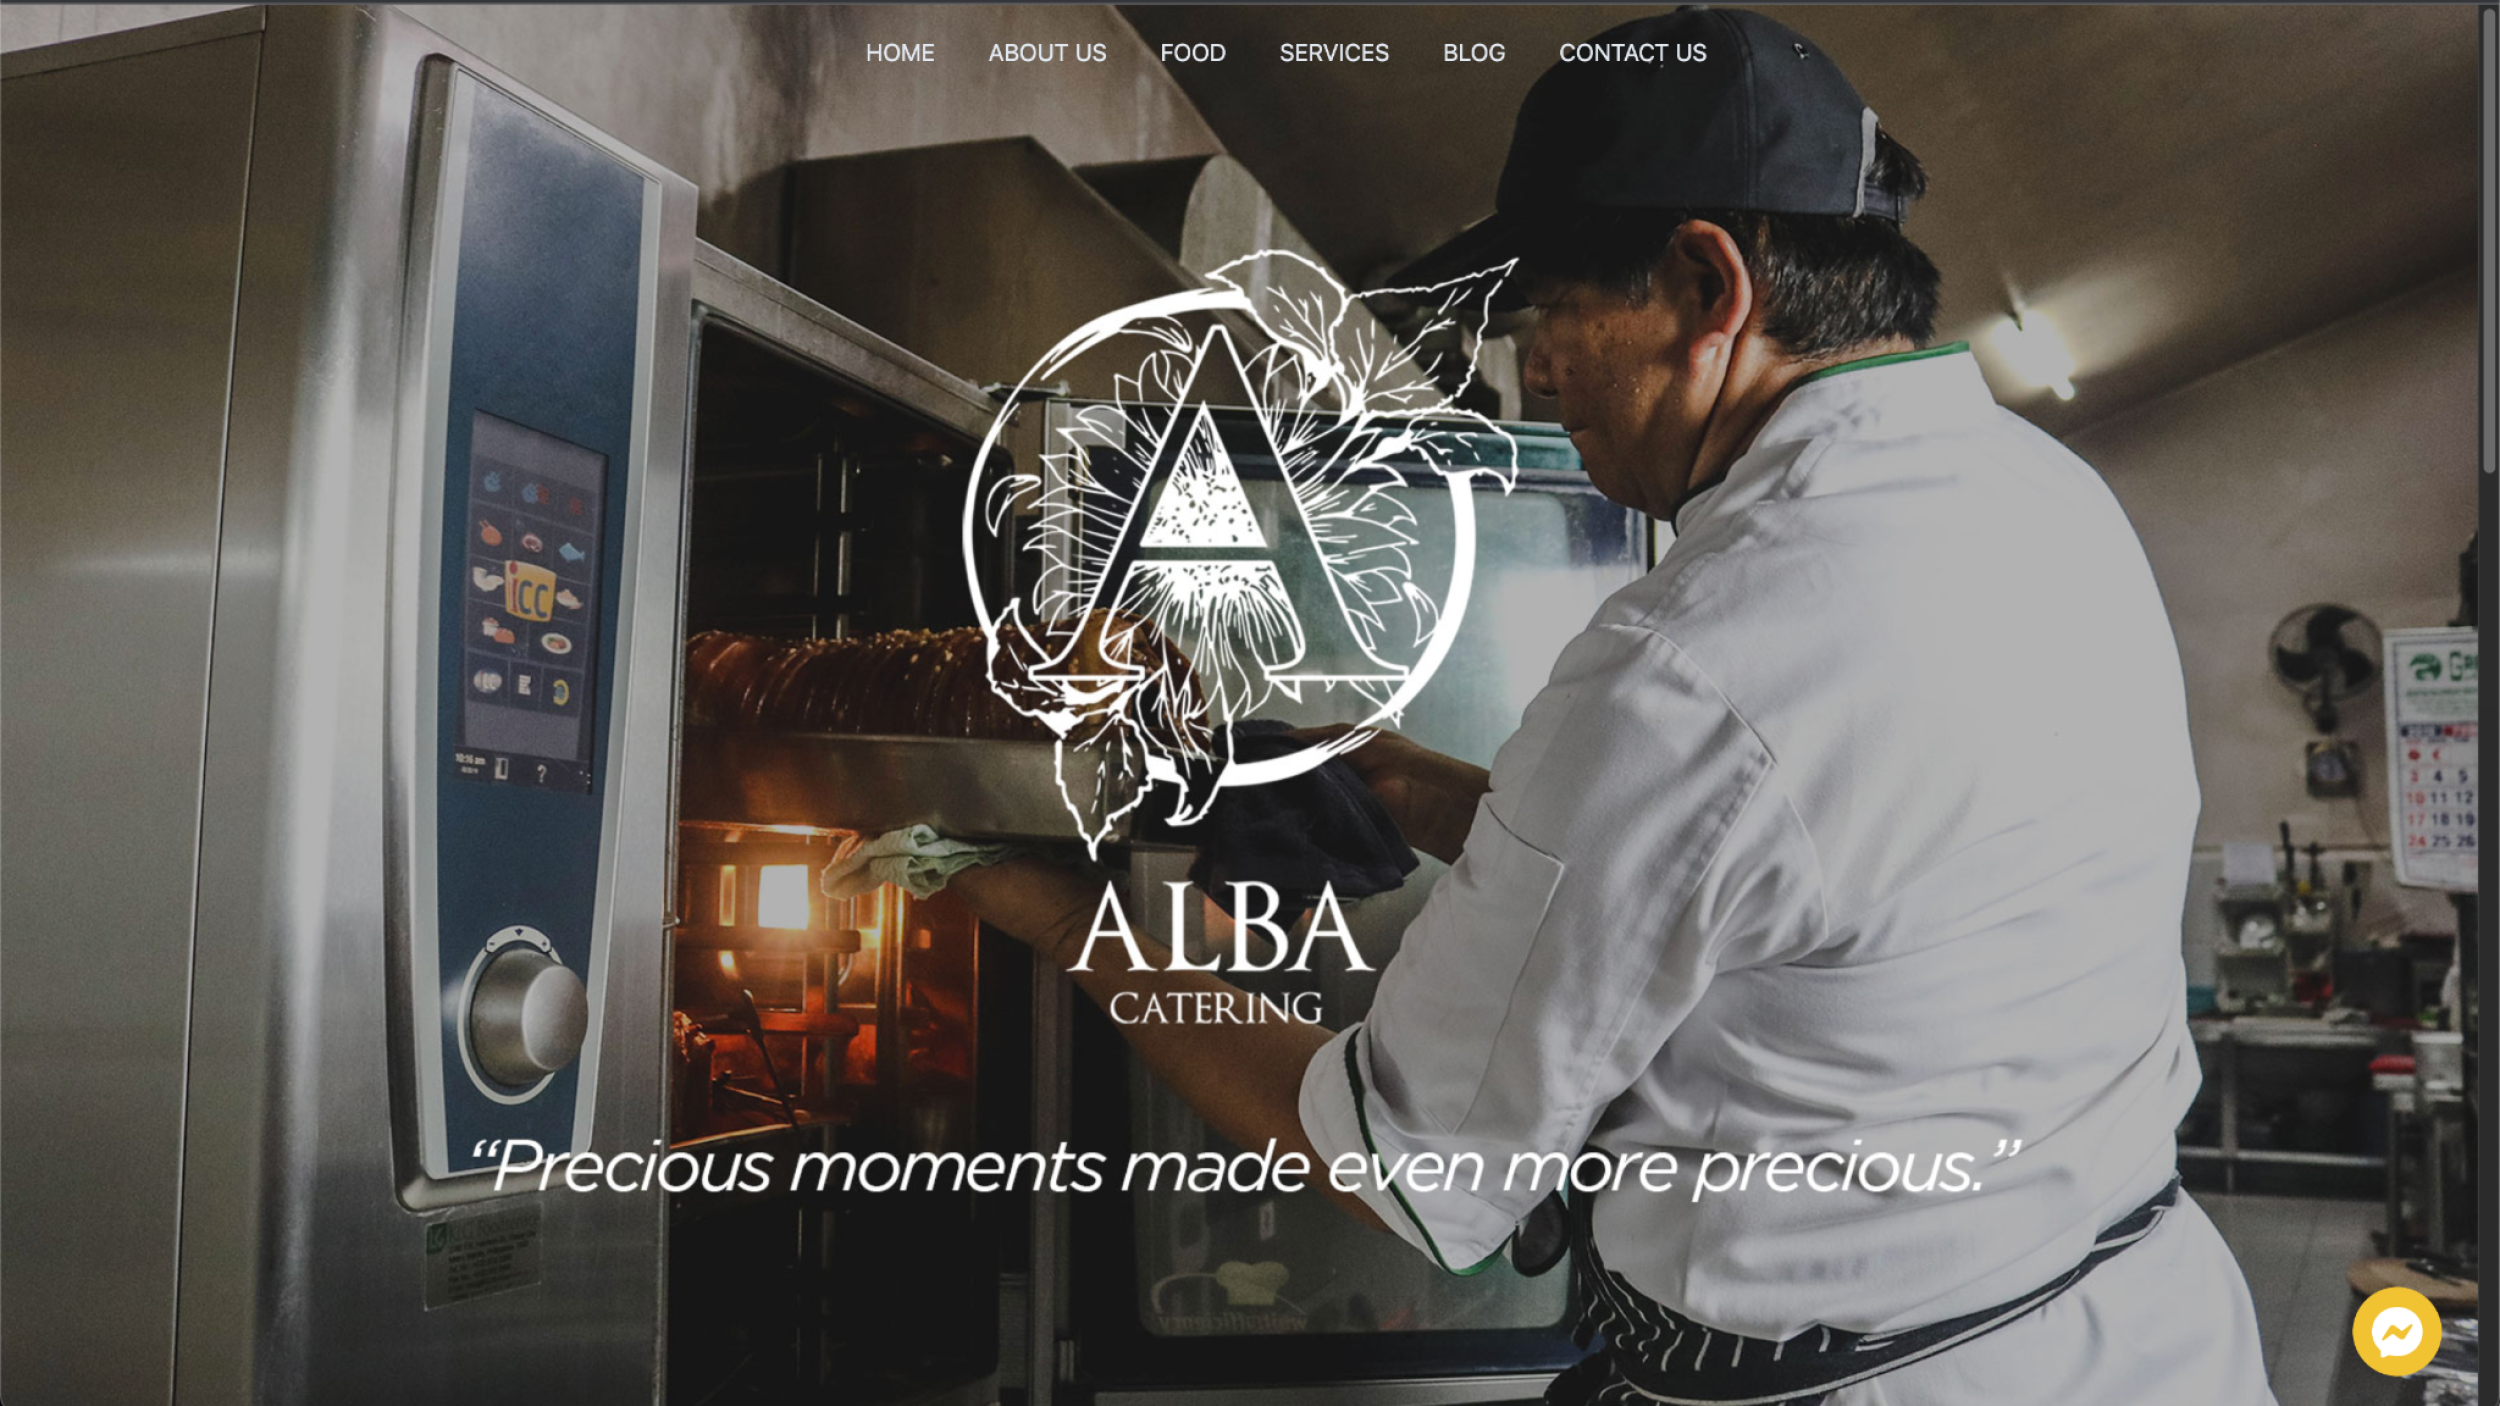 Alba Catering is a combined effort of spouses Ramon & Jeanette Alba. Known for their sumptuous dishes & elegant arrangements.